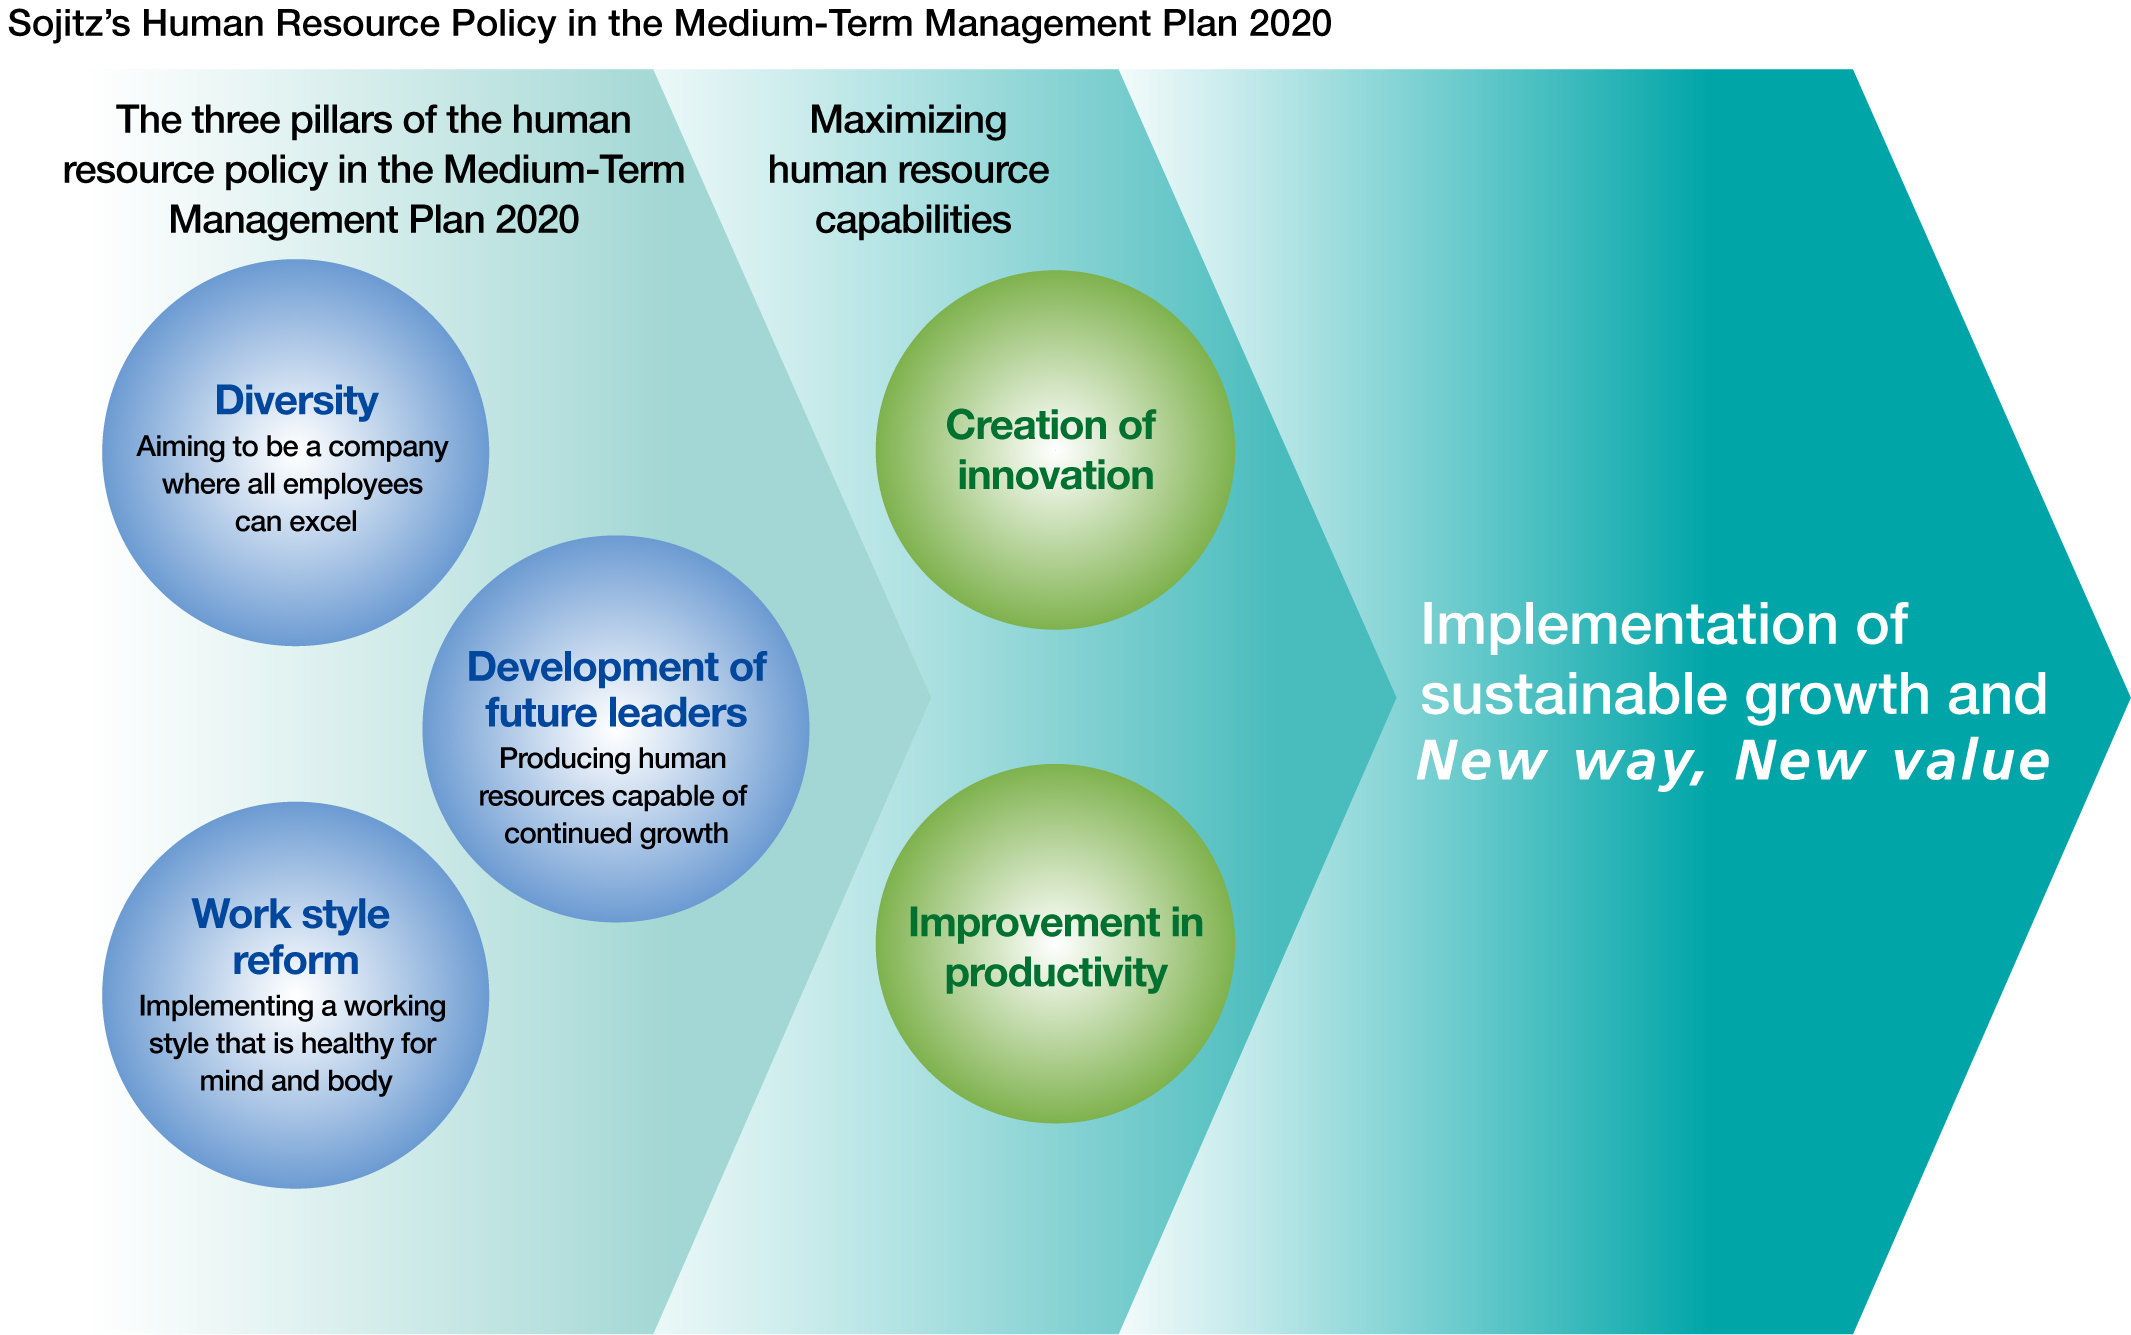 Sojitz’s Human Resource Policy in the Medium-Term Management Plan 2020